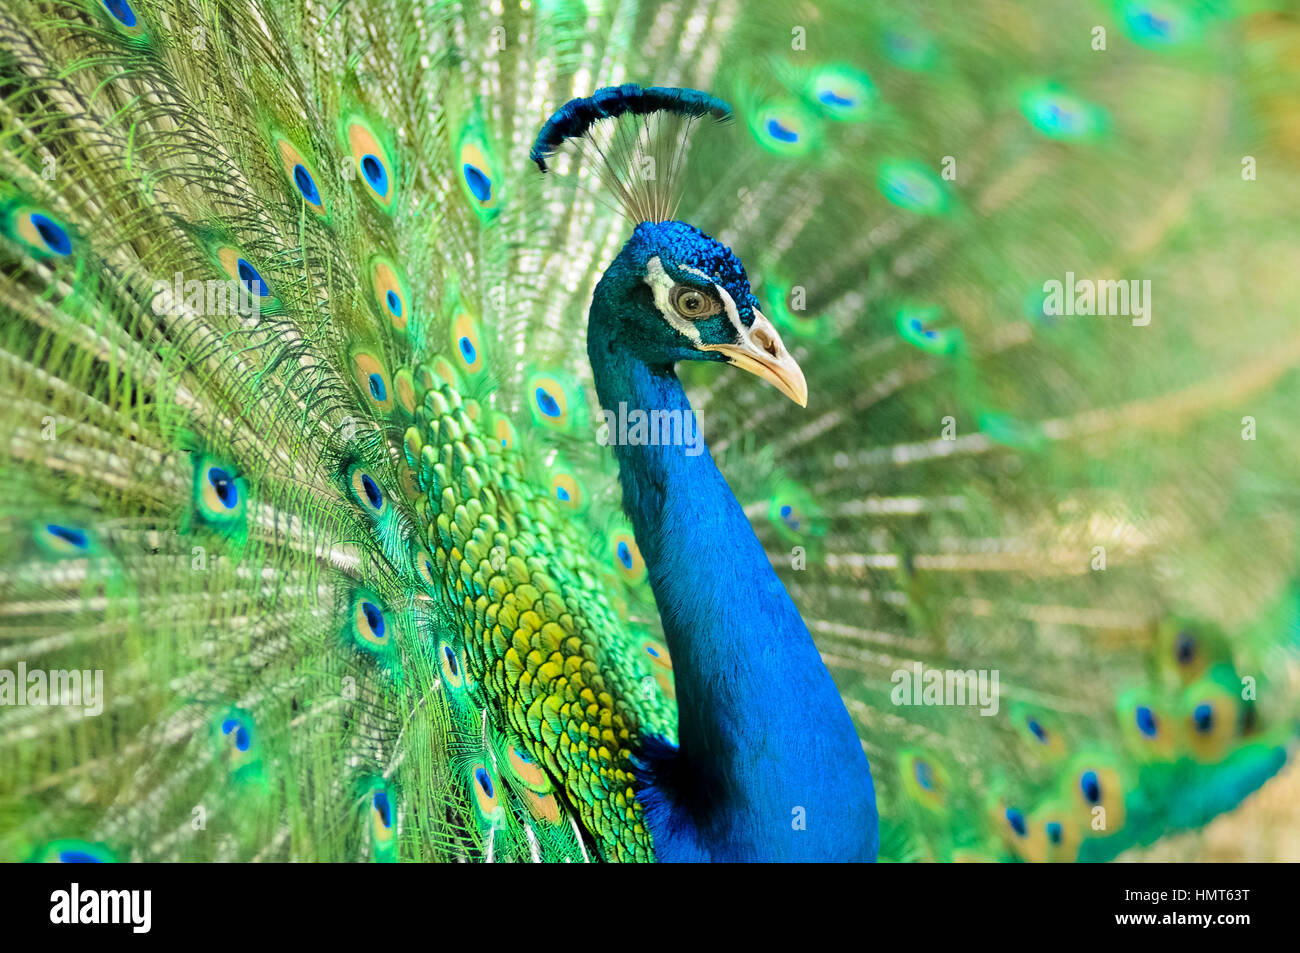 Beautiful peacock showing its feather Stock Photo